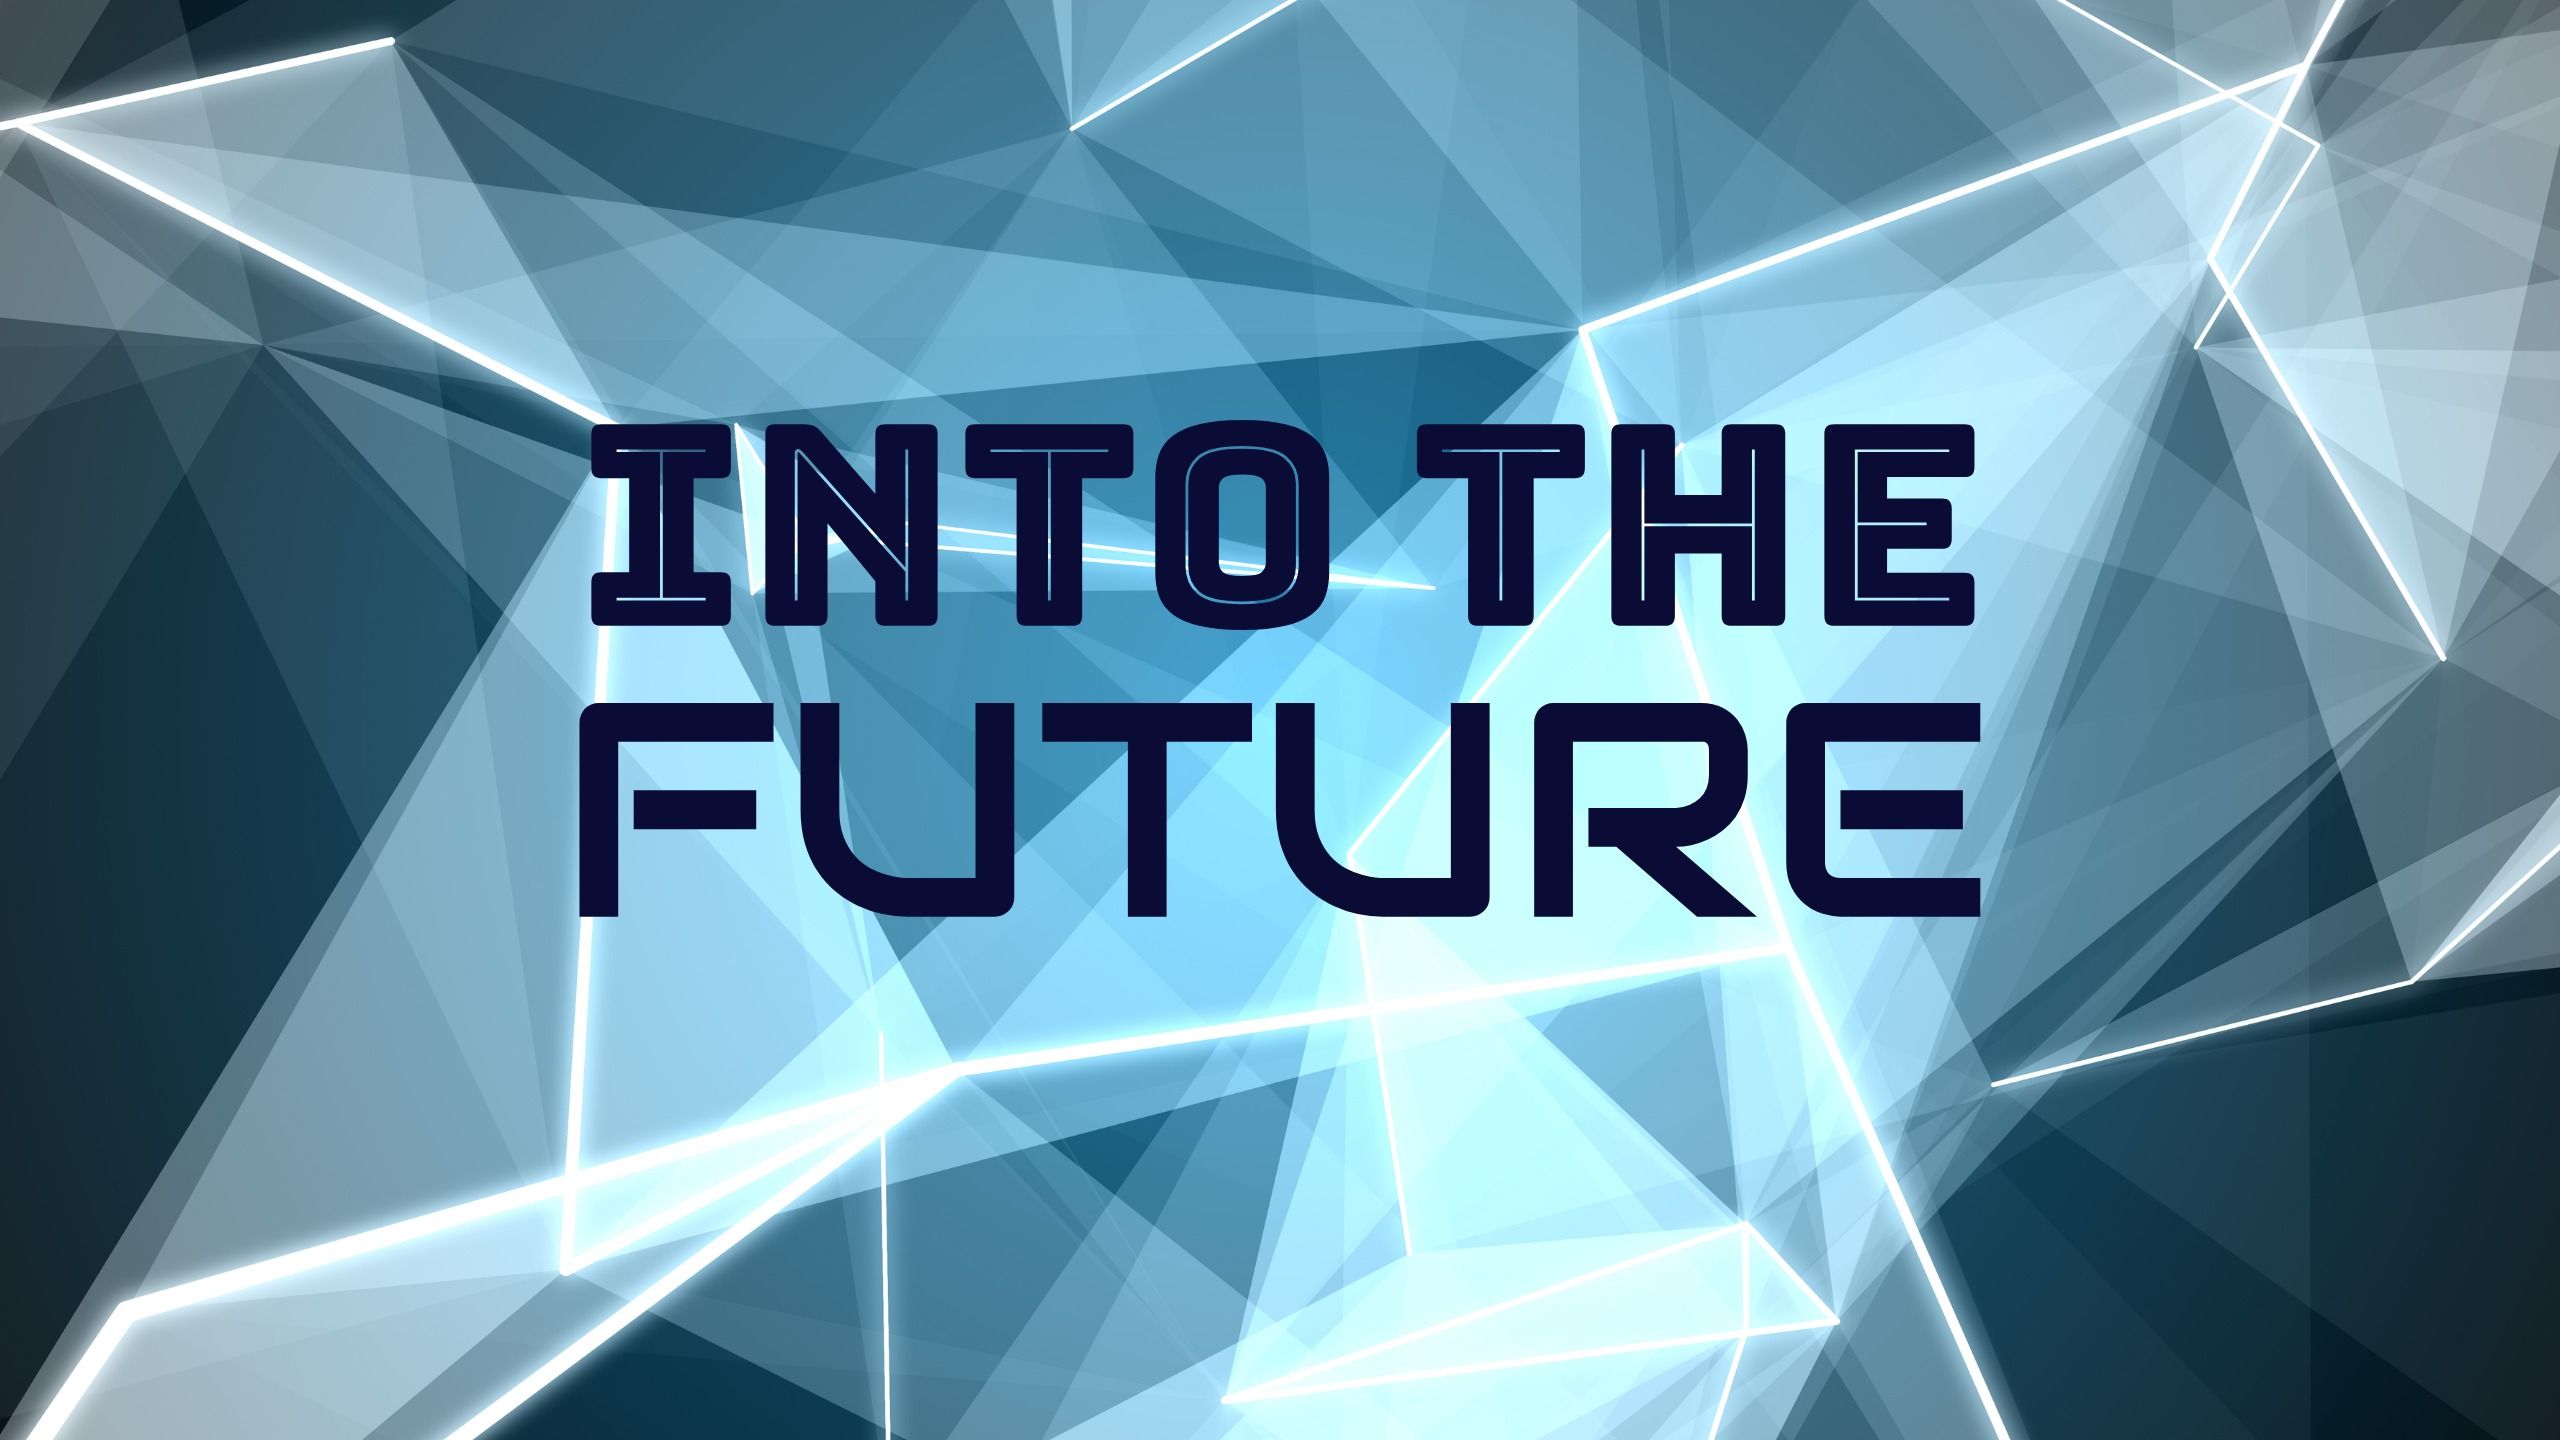 Title "Into the Future" on an abstract triangular mesh background - Modern packaging design elements - Image